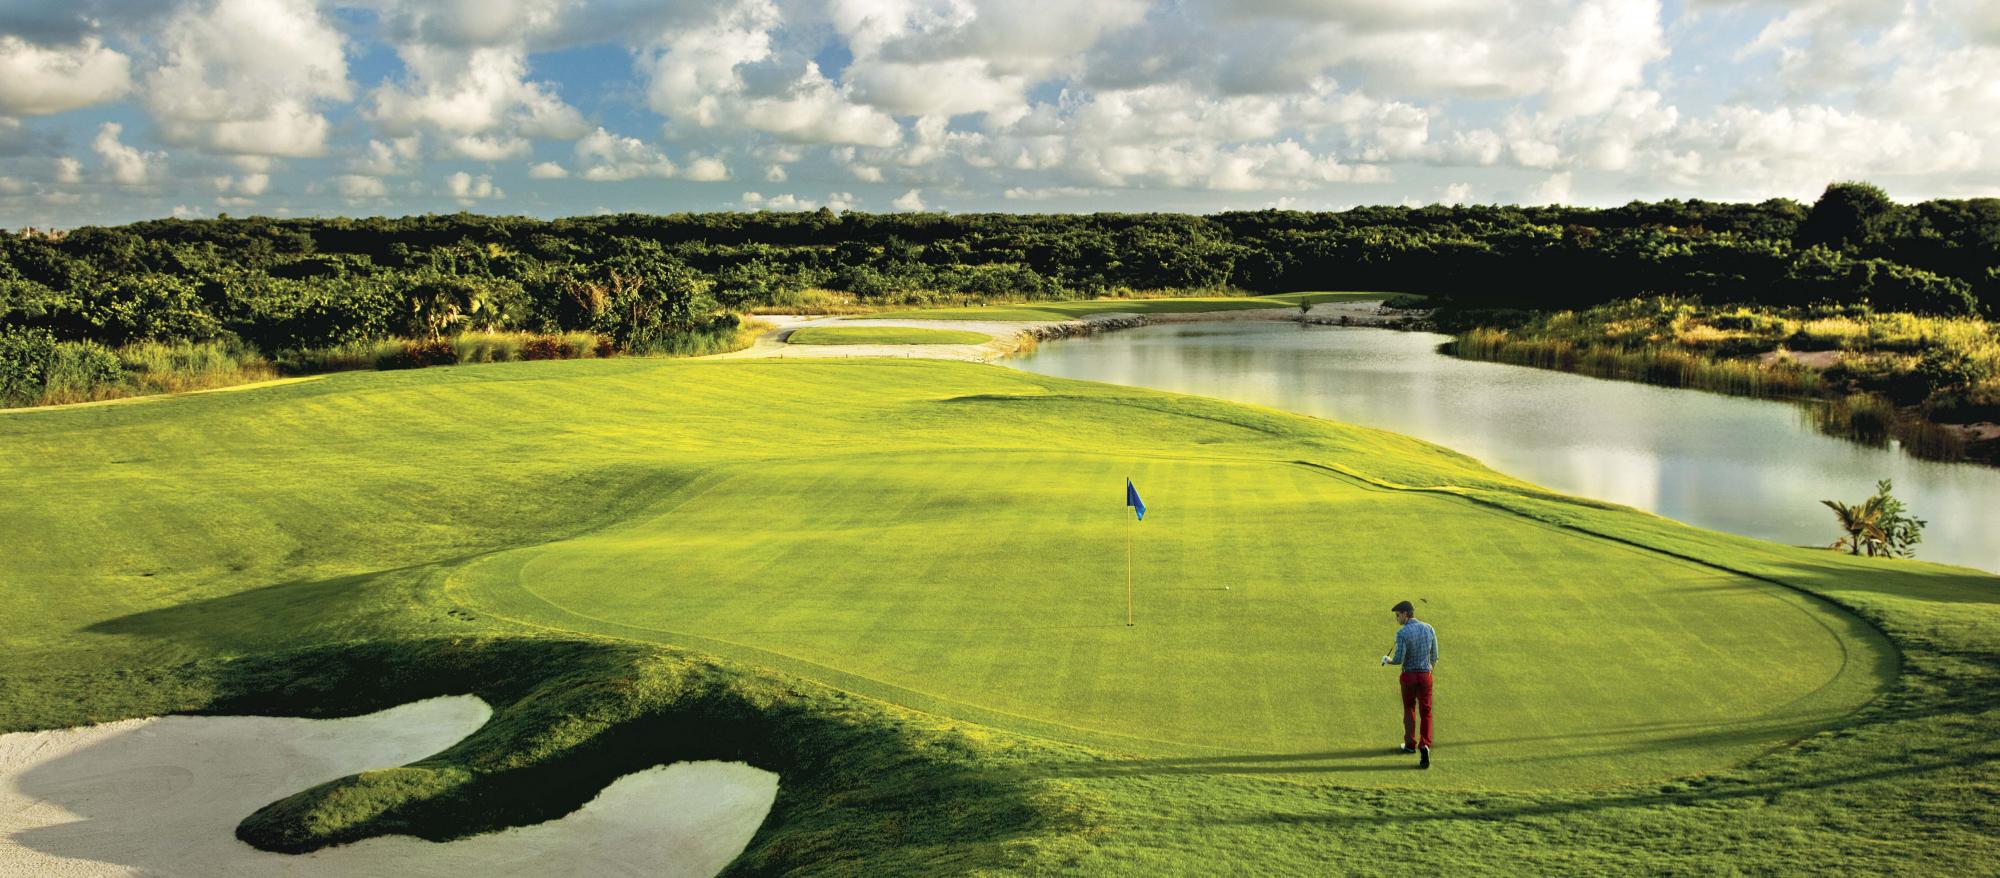 View Hard Rock Golf Club at Cana Bay's picturesque golf course within vibrant Dominican Republic.